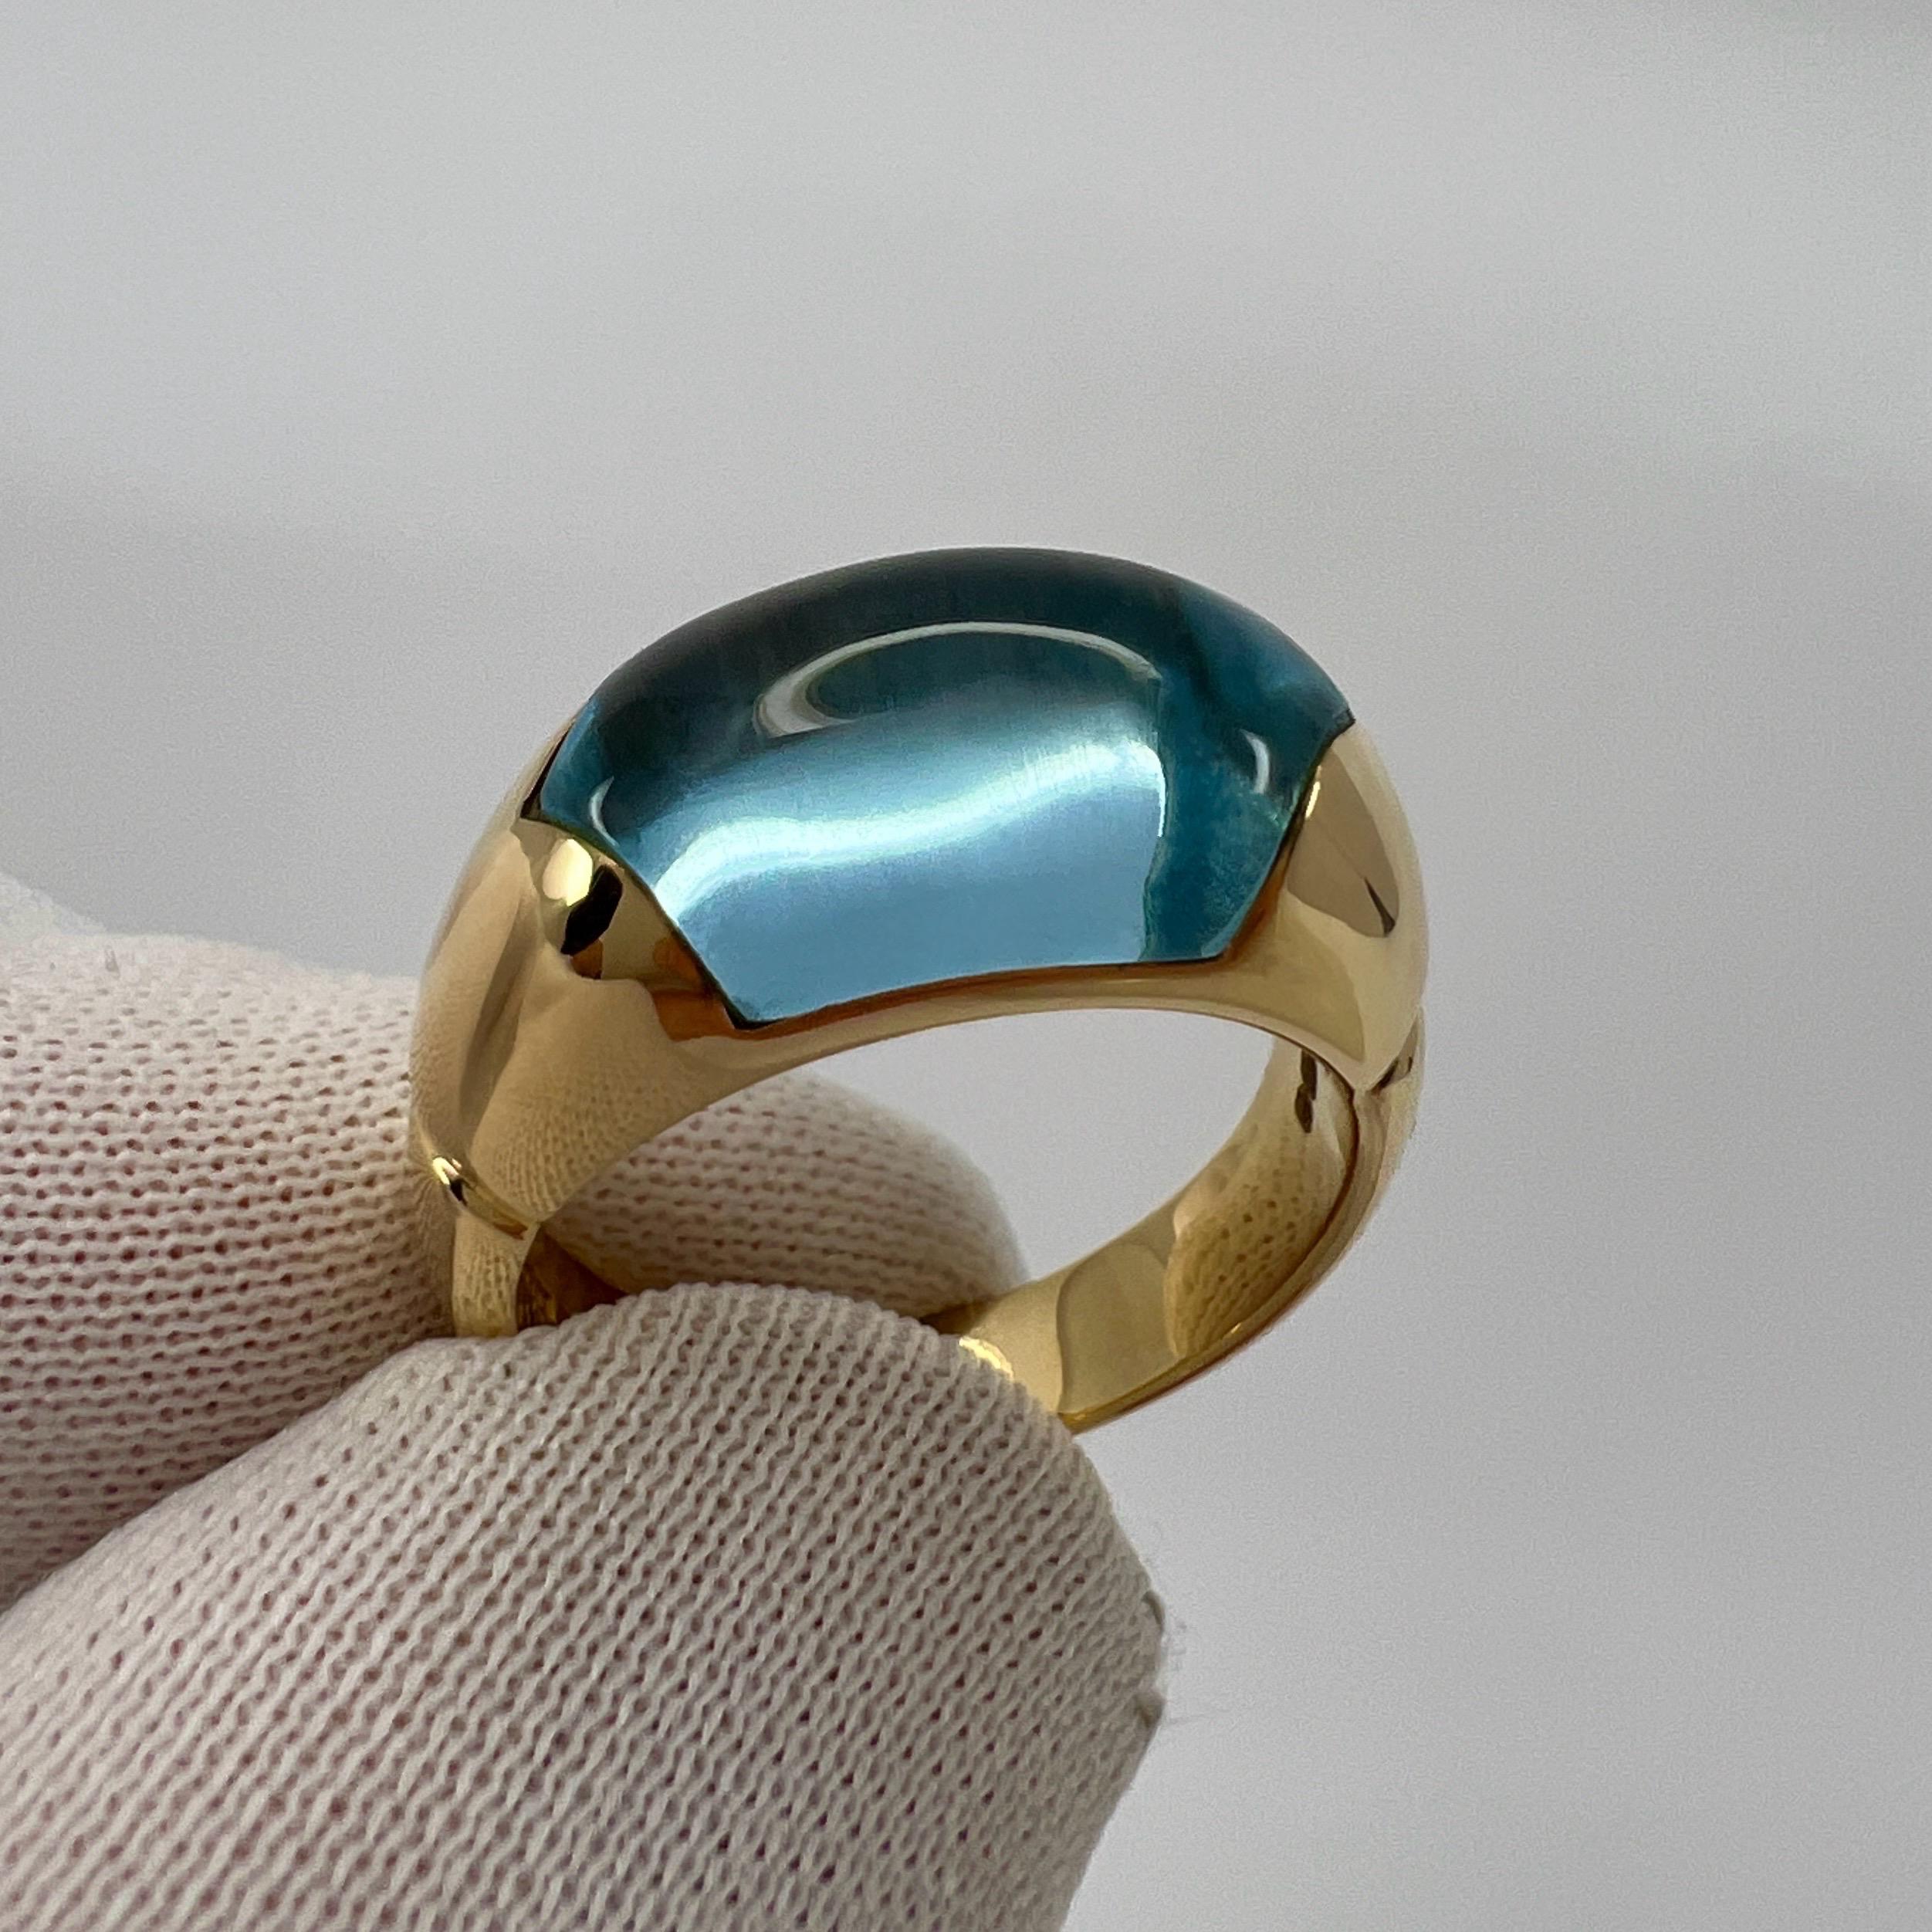 Rare Vintage Bvlgari Certica 18k Yellow Gold Blue Topaz Dome Ring with Box 4